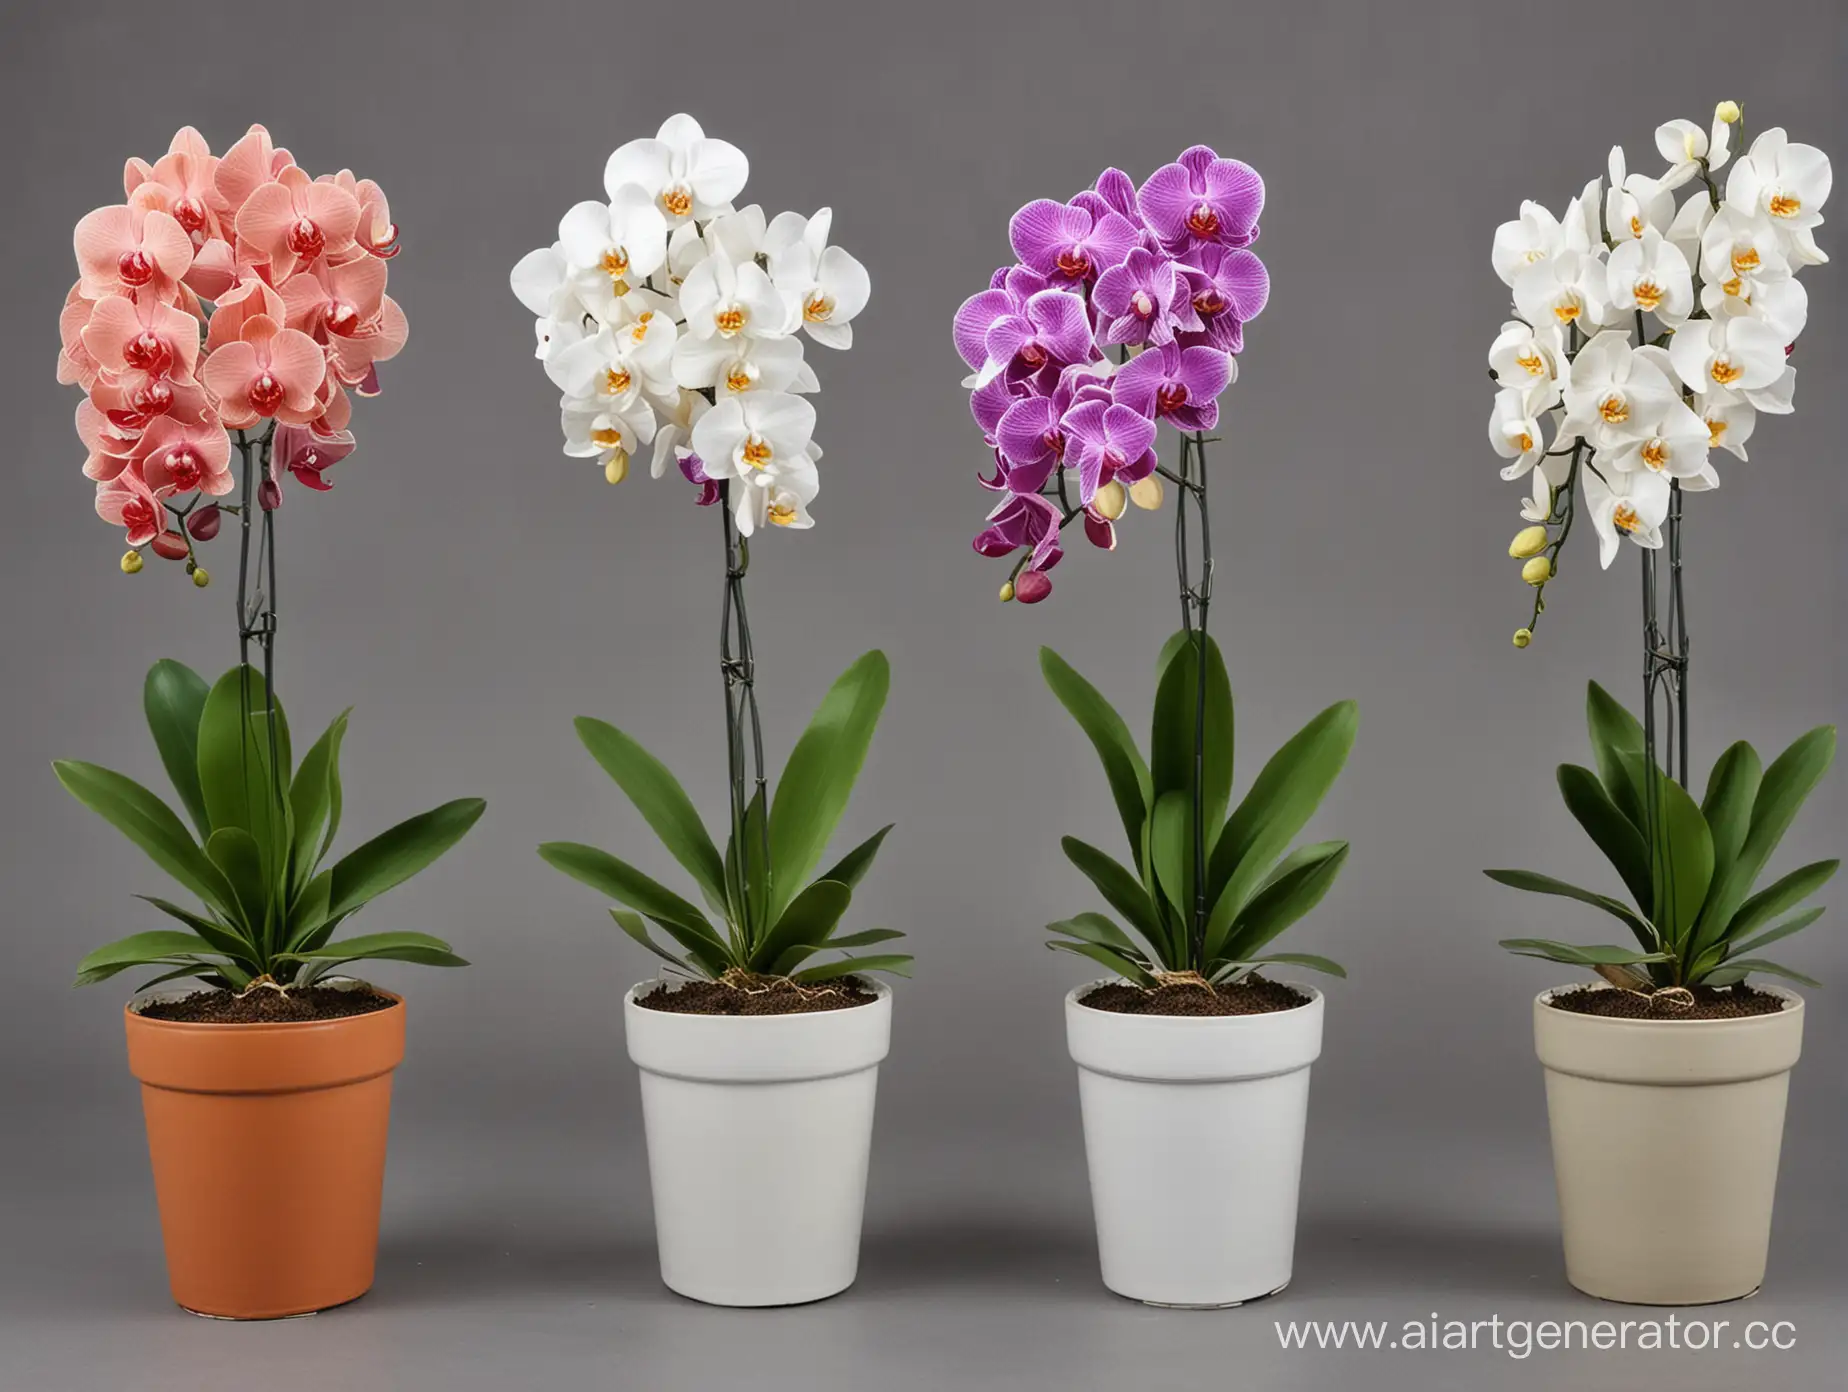 Lush-Orchid-Garden-with-Five-Potted-Orchids-and-Blooming-Flowers